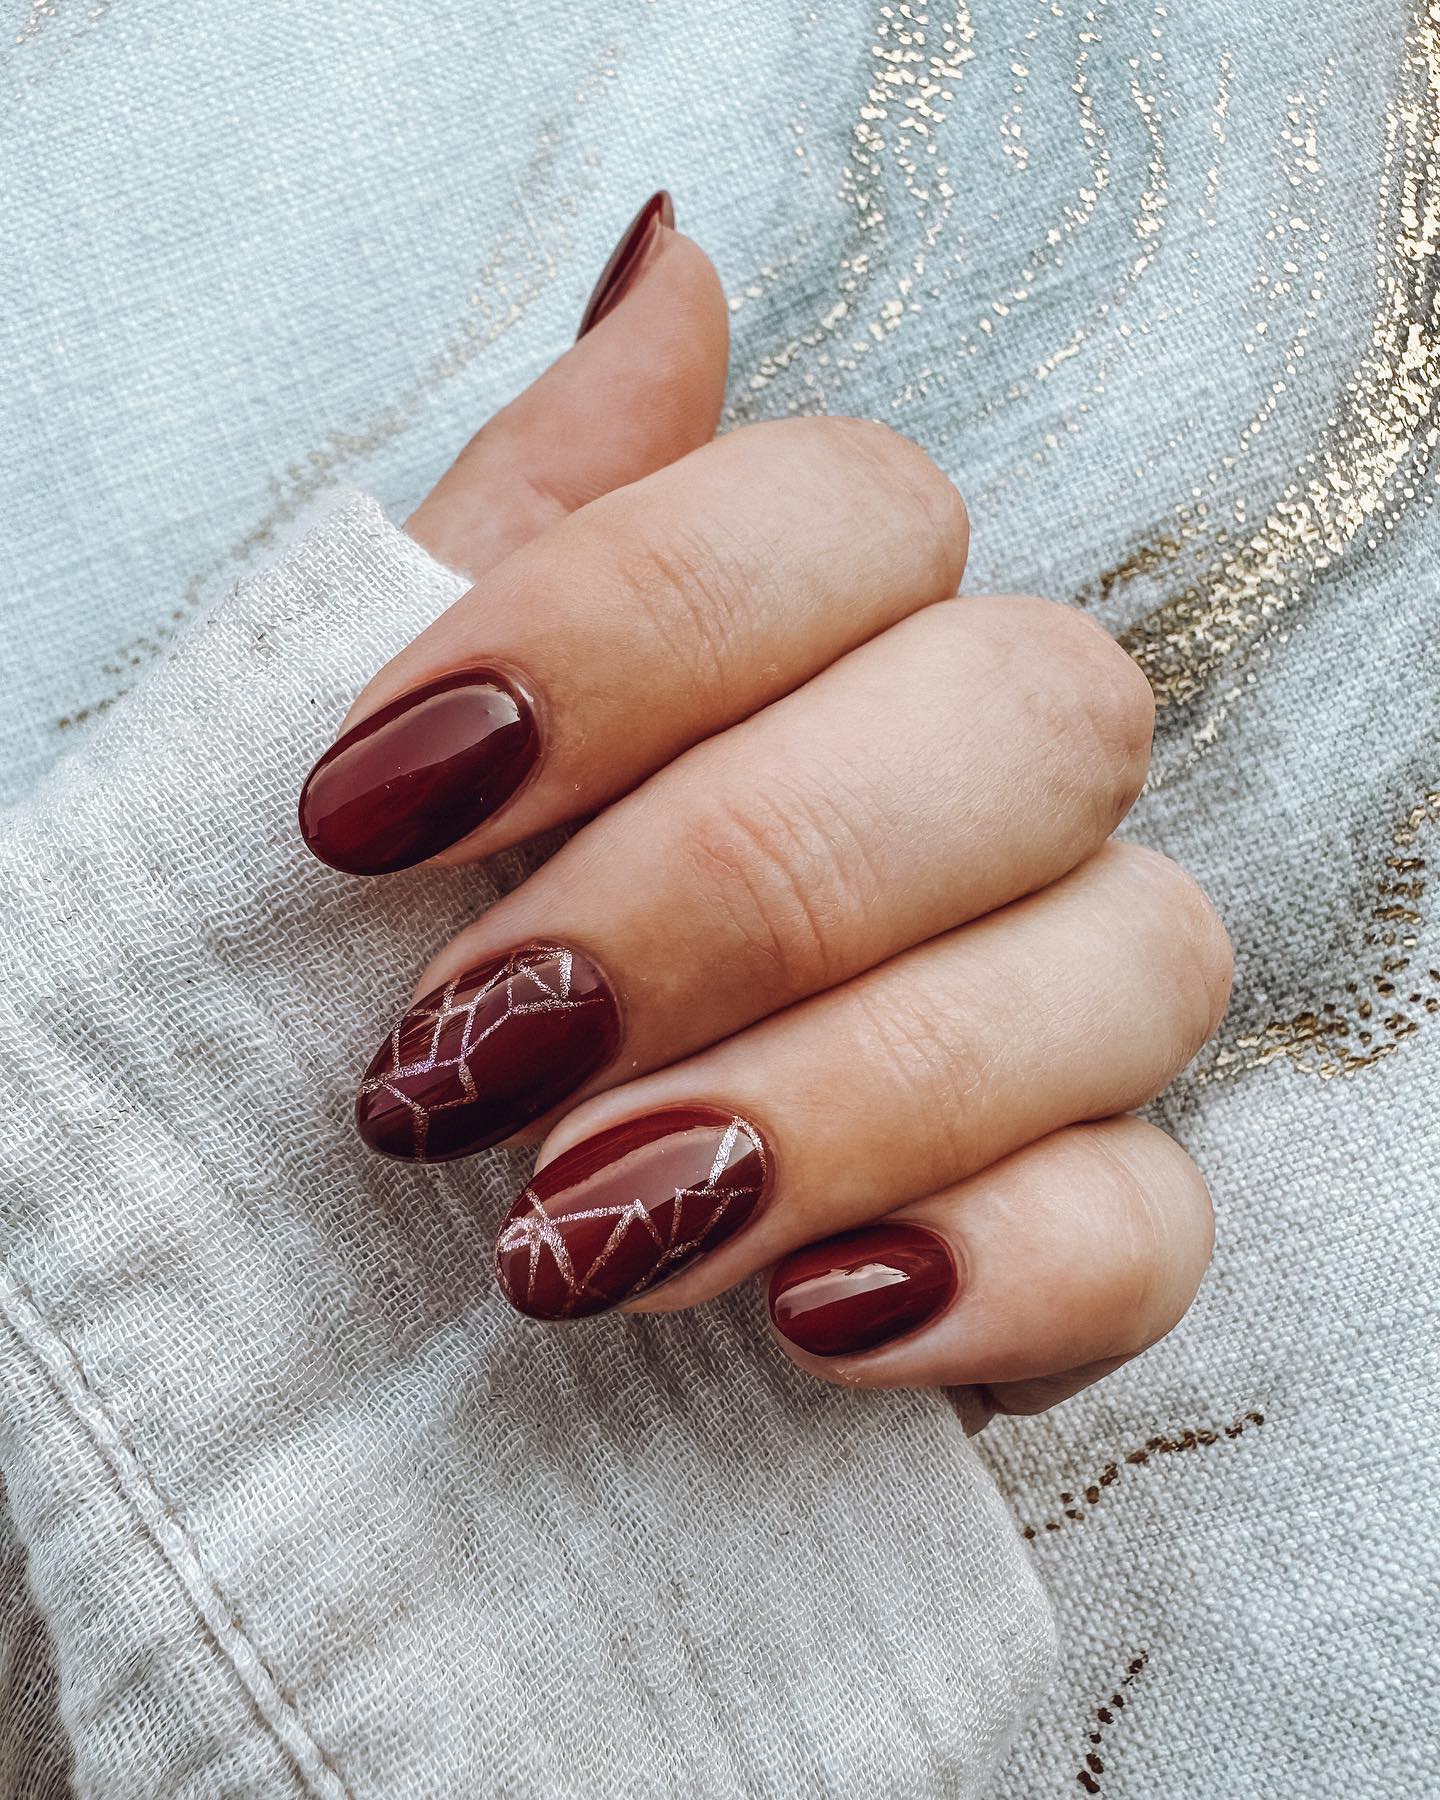 27 Charming Winter Nail Designs : Burgundy Nails with Metallic Accents